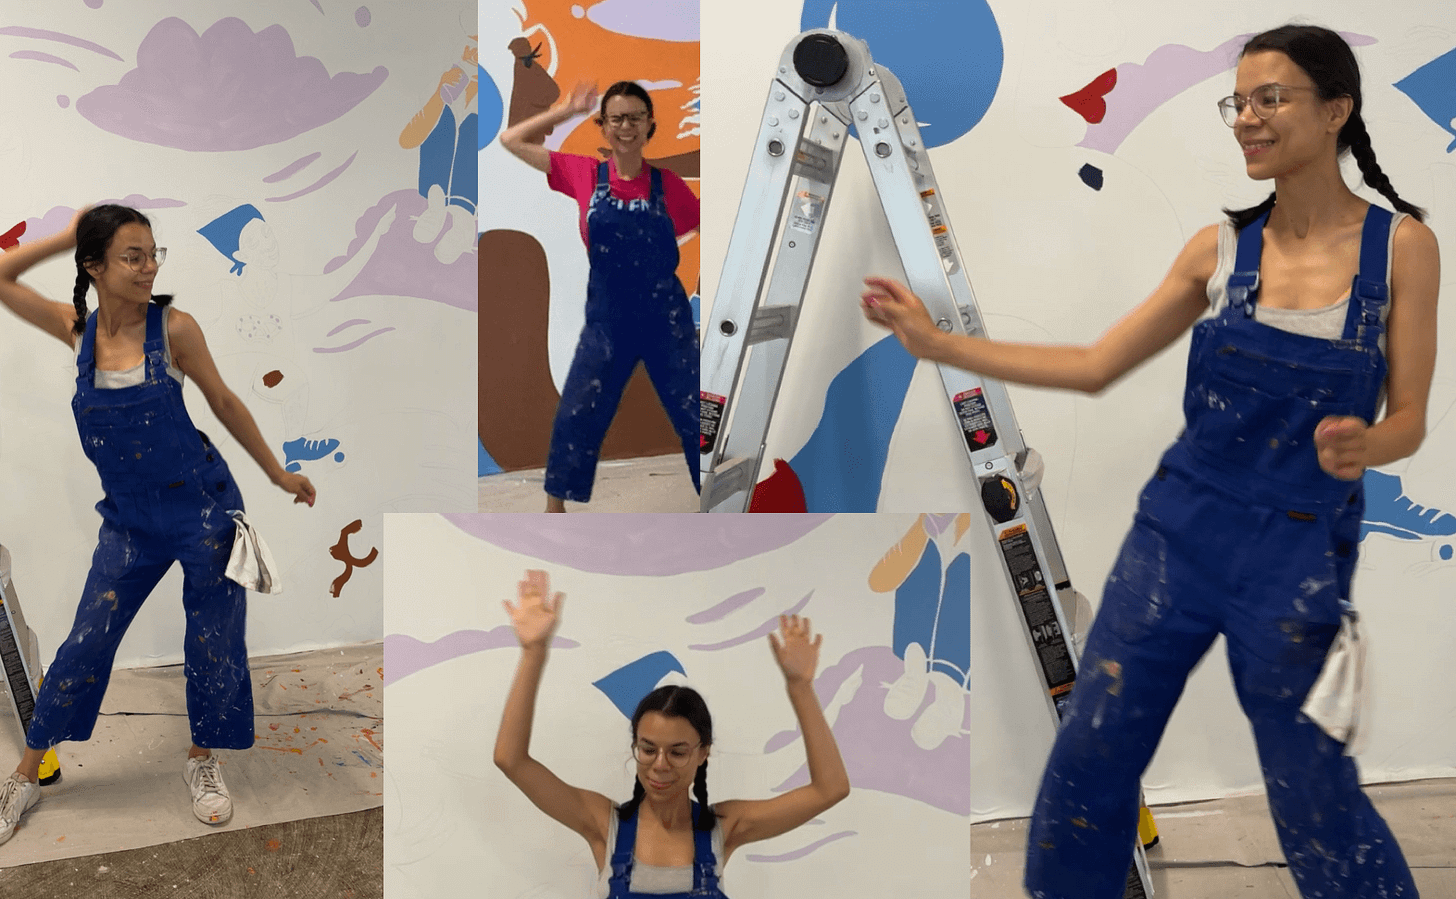 A goofy collage of Cindy dancing in front of her mural at different levels of mural completion